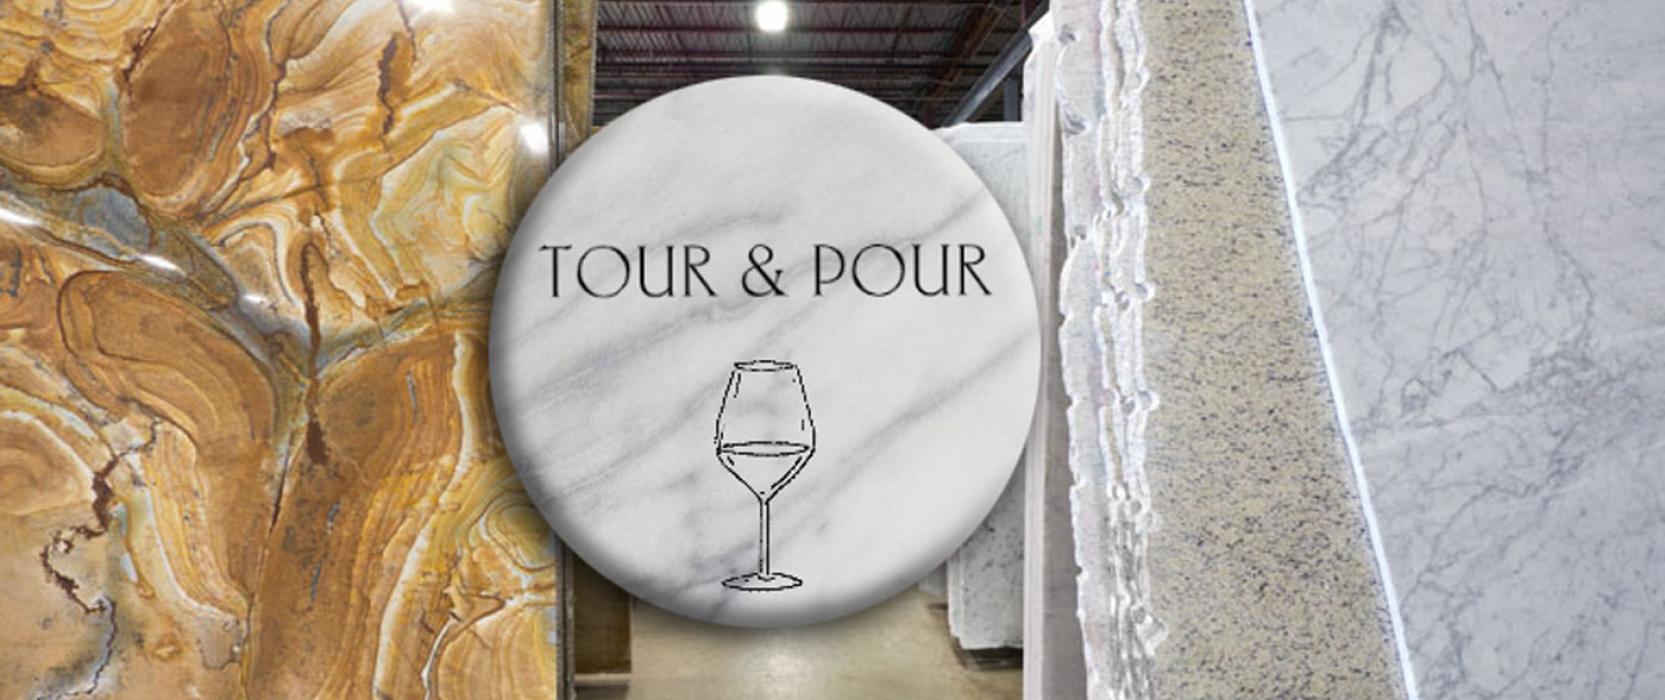 Tour and Pour Event for the Trade at LeaMar Industries Jan. 30